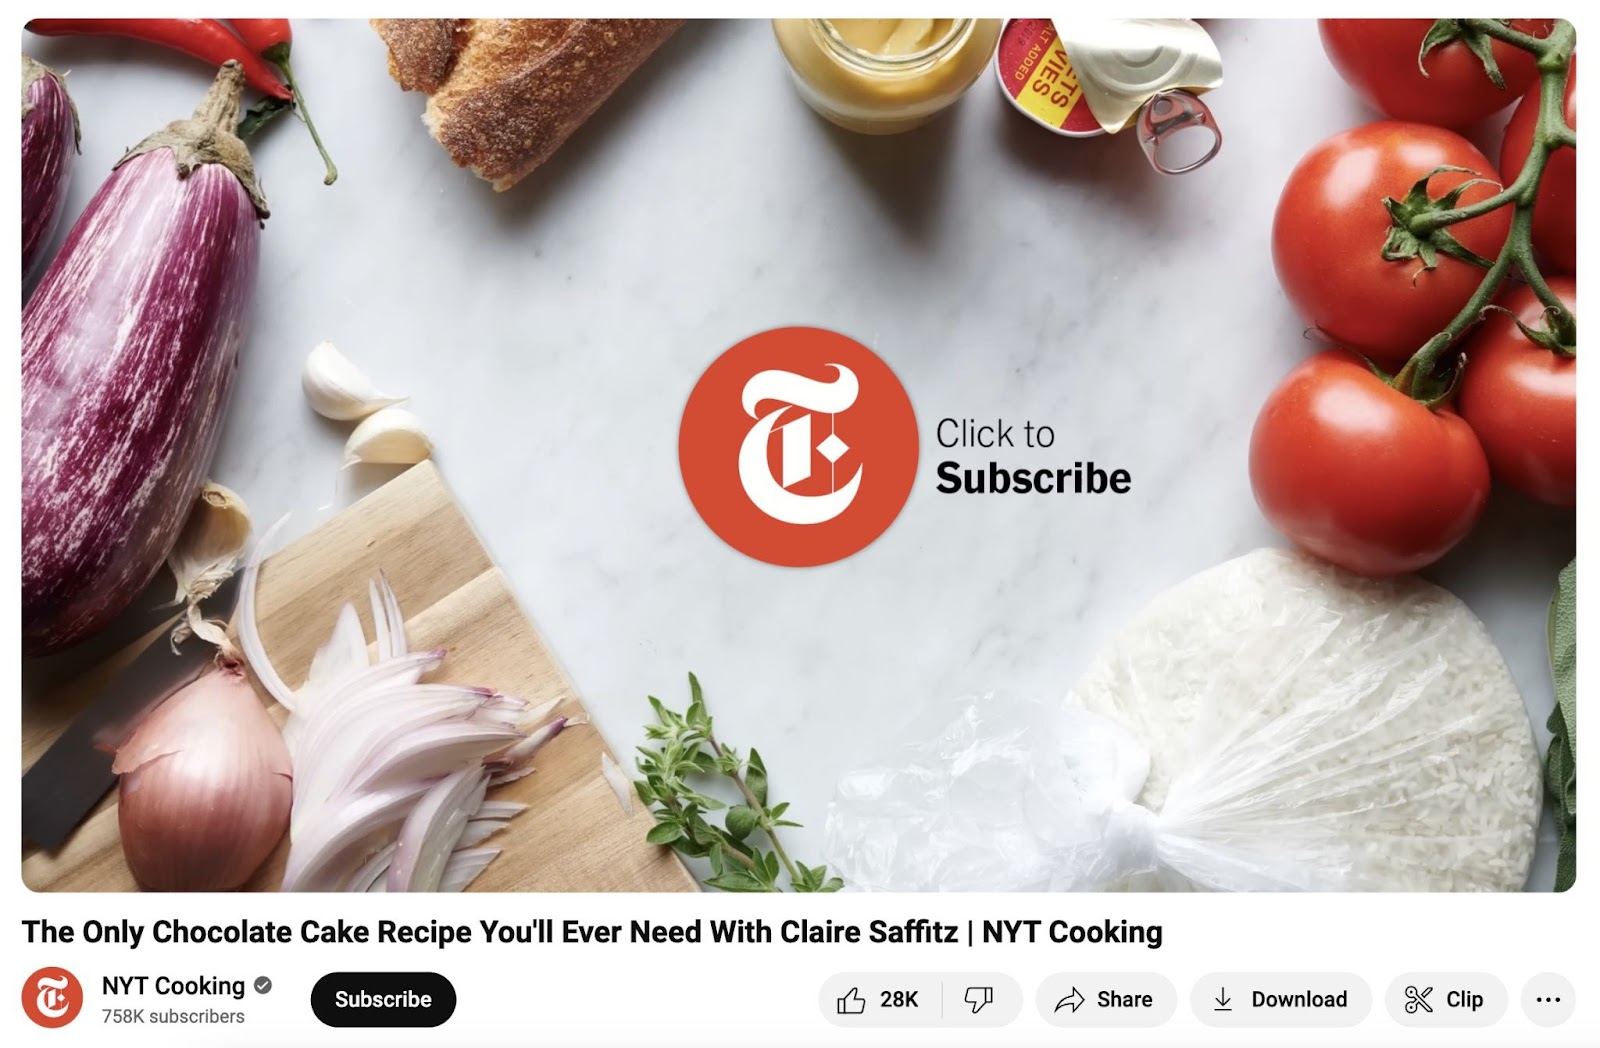 End screen from the New York Times Cooking channel that reads "Click to Subscribe"